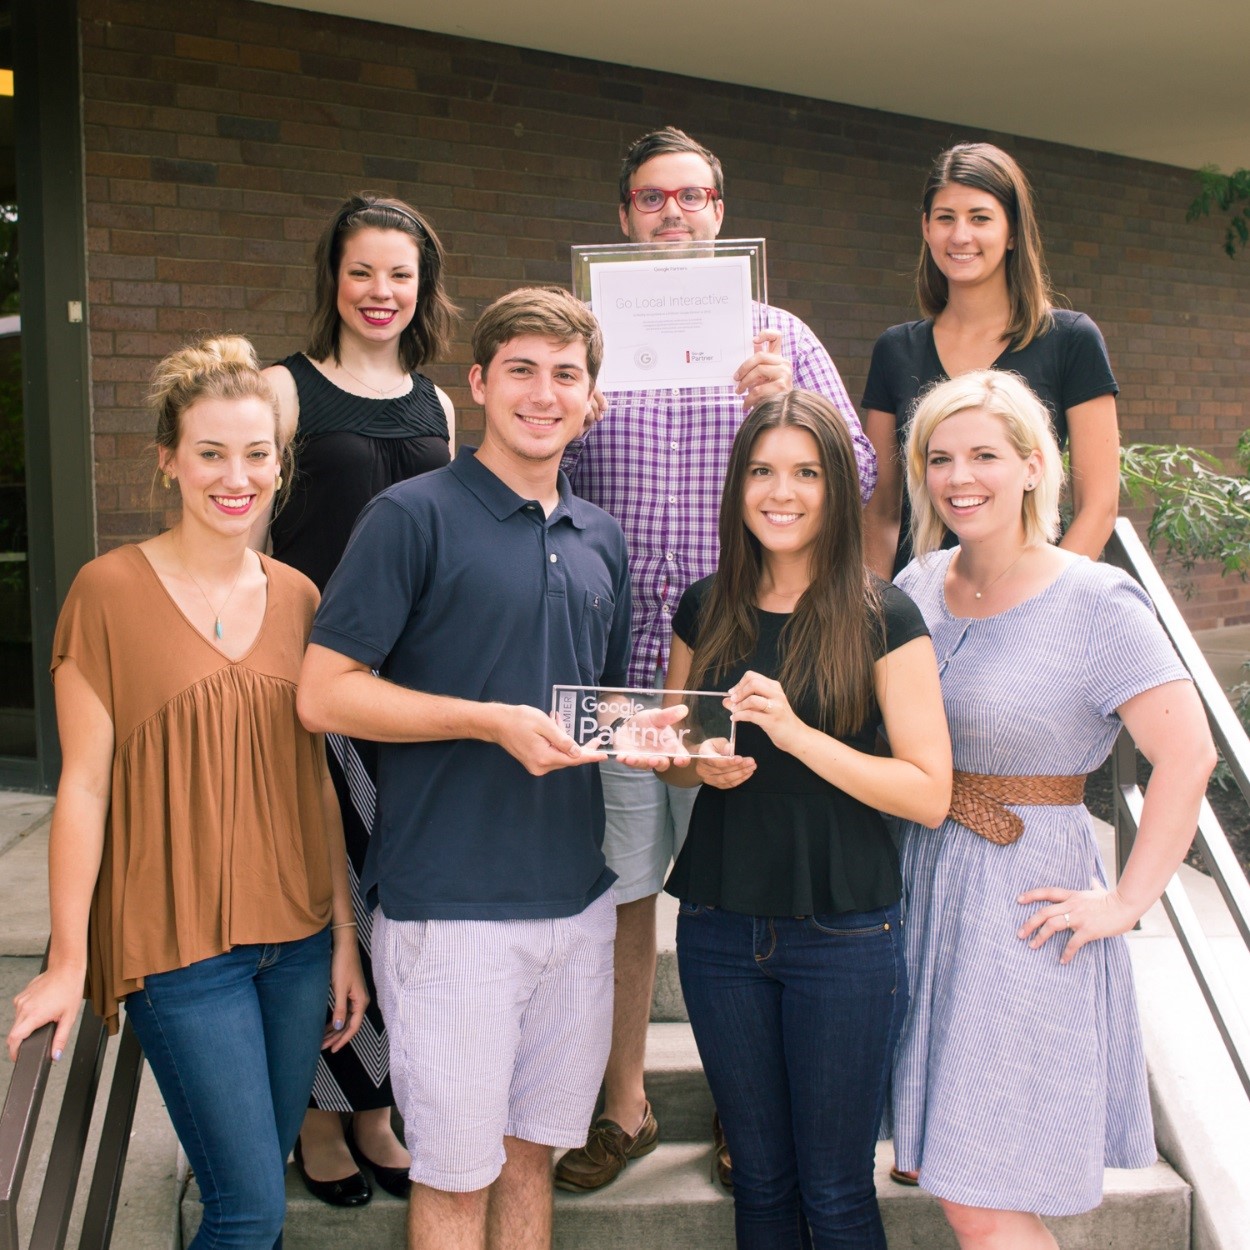 AdWords certified Go Local Interactive employees pose with their Google Premier Partner award.